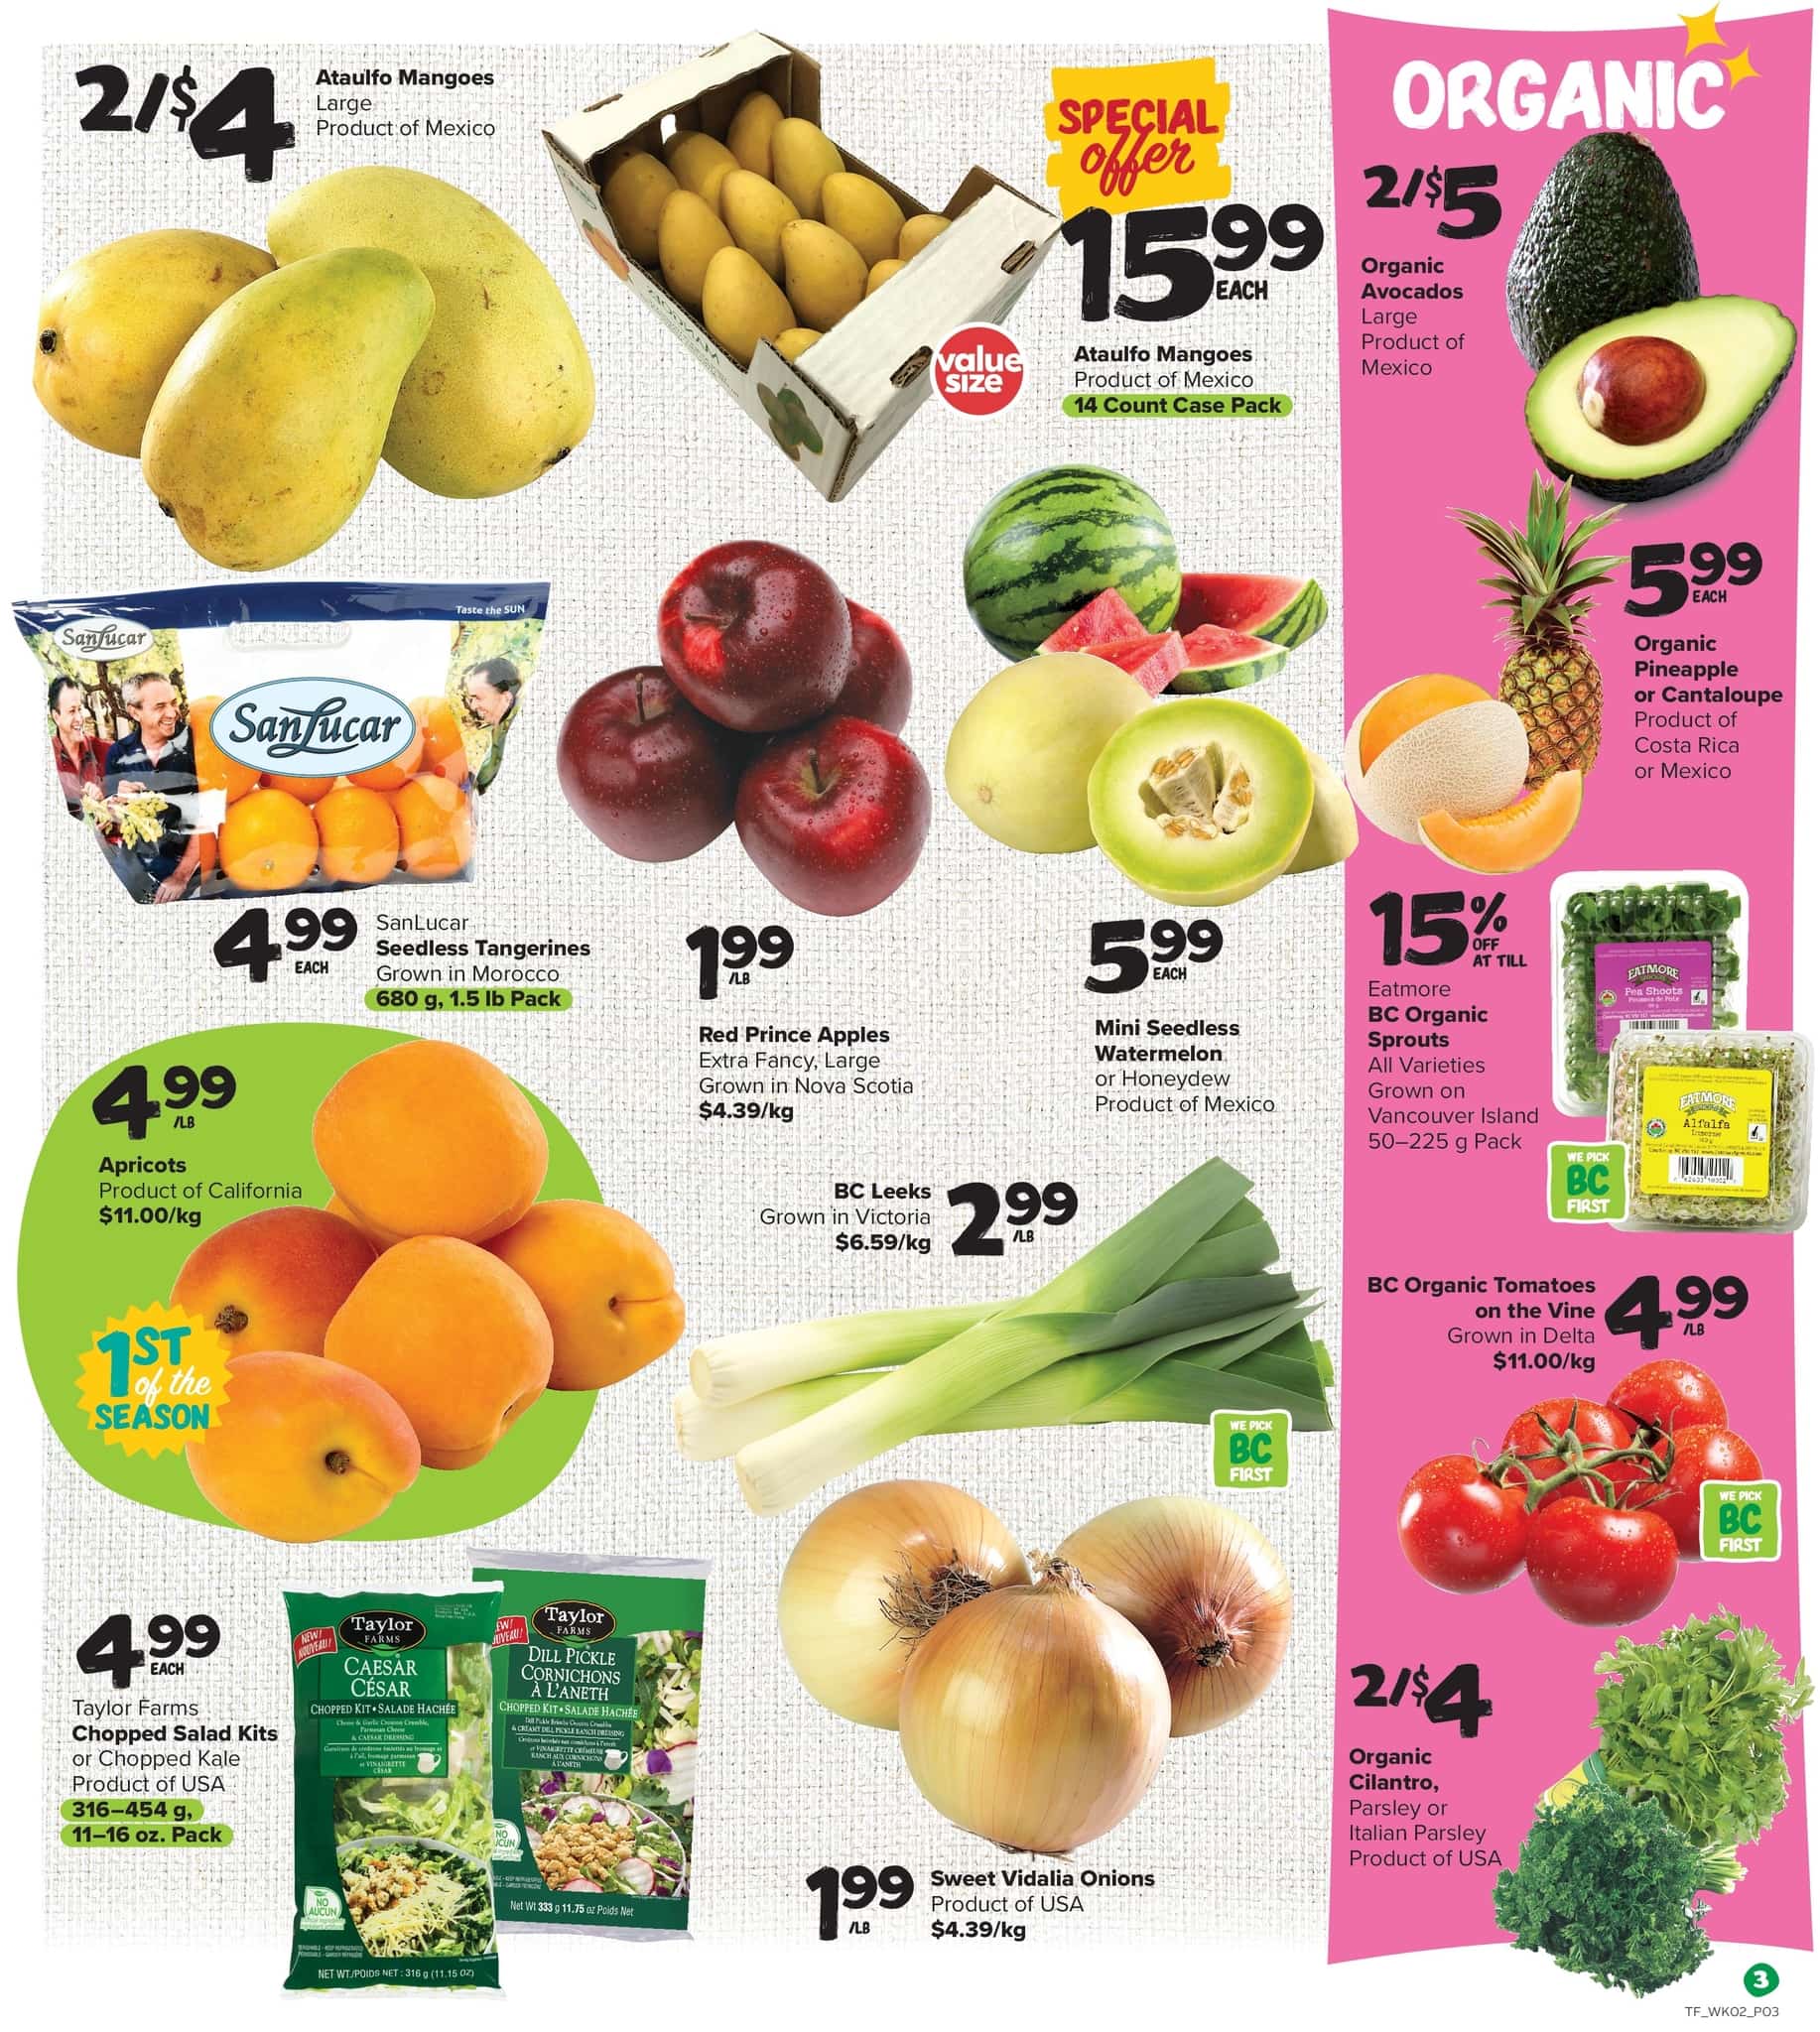 Thrifty Foods - Weekly Flyer Specials - Page 3